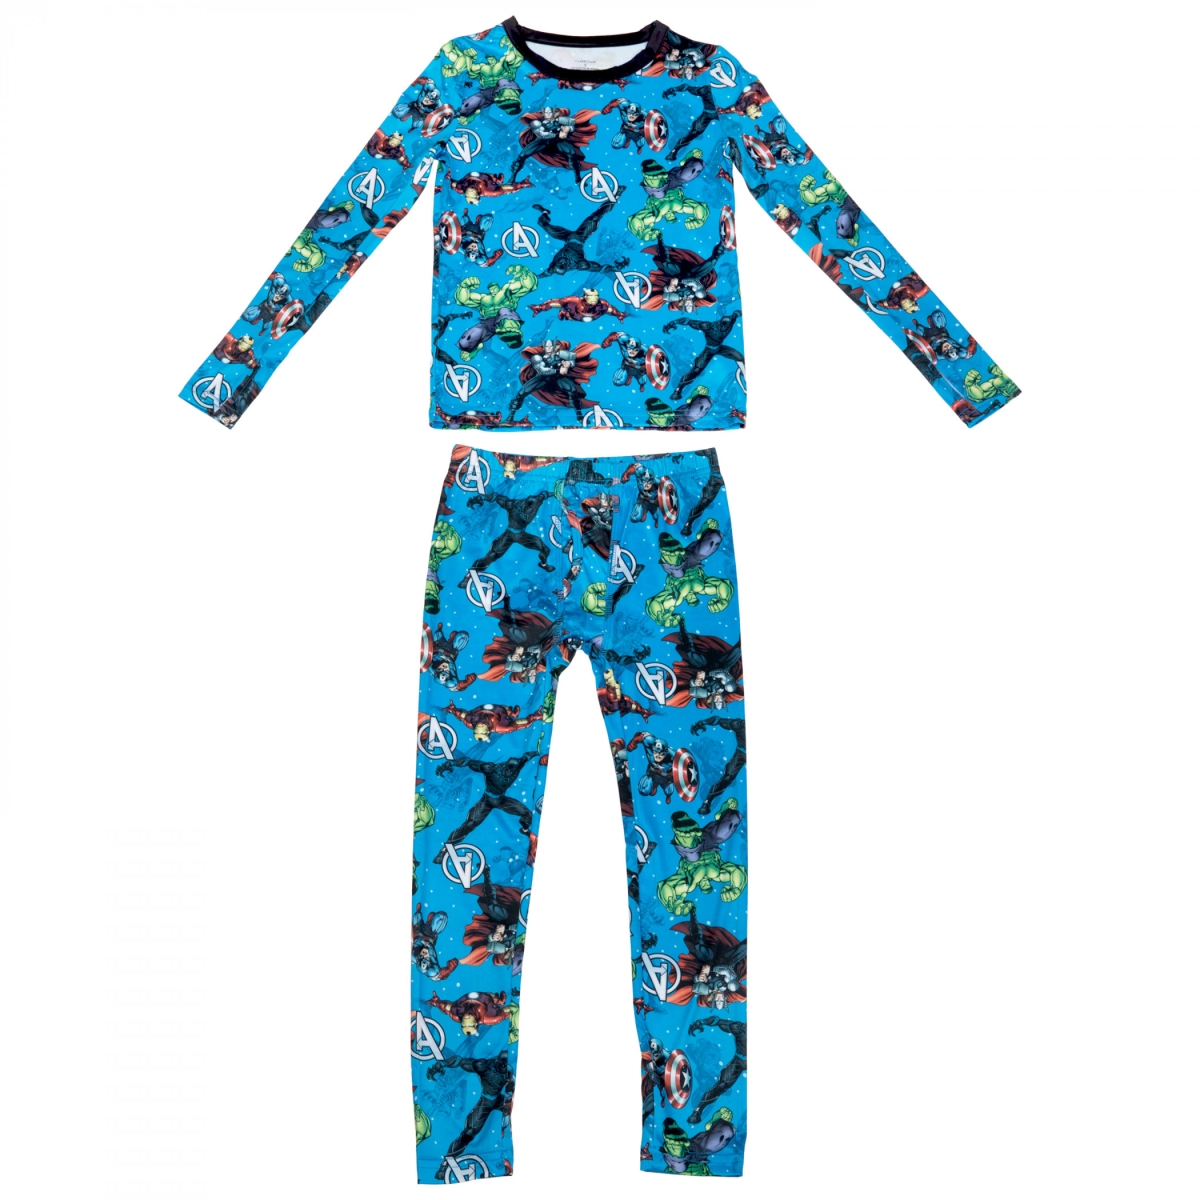 Picture of Avengers 846000-ge-11-12 Marvel Comics the Avengers Mightiest Heroes Boys Pajama Set - Large - 11-12 - 2 Piece